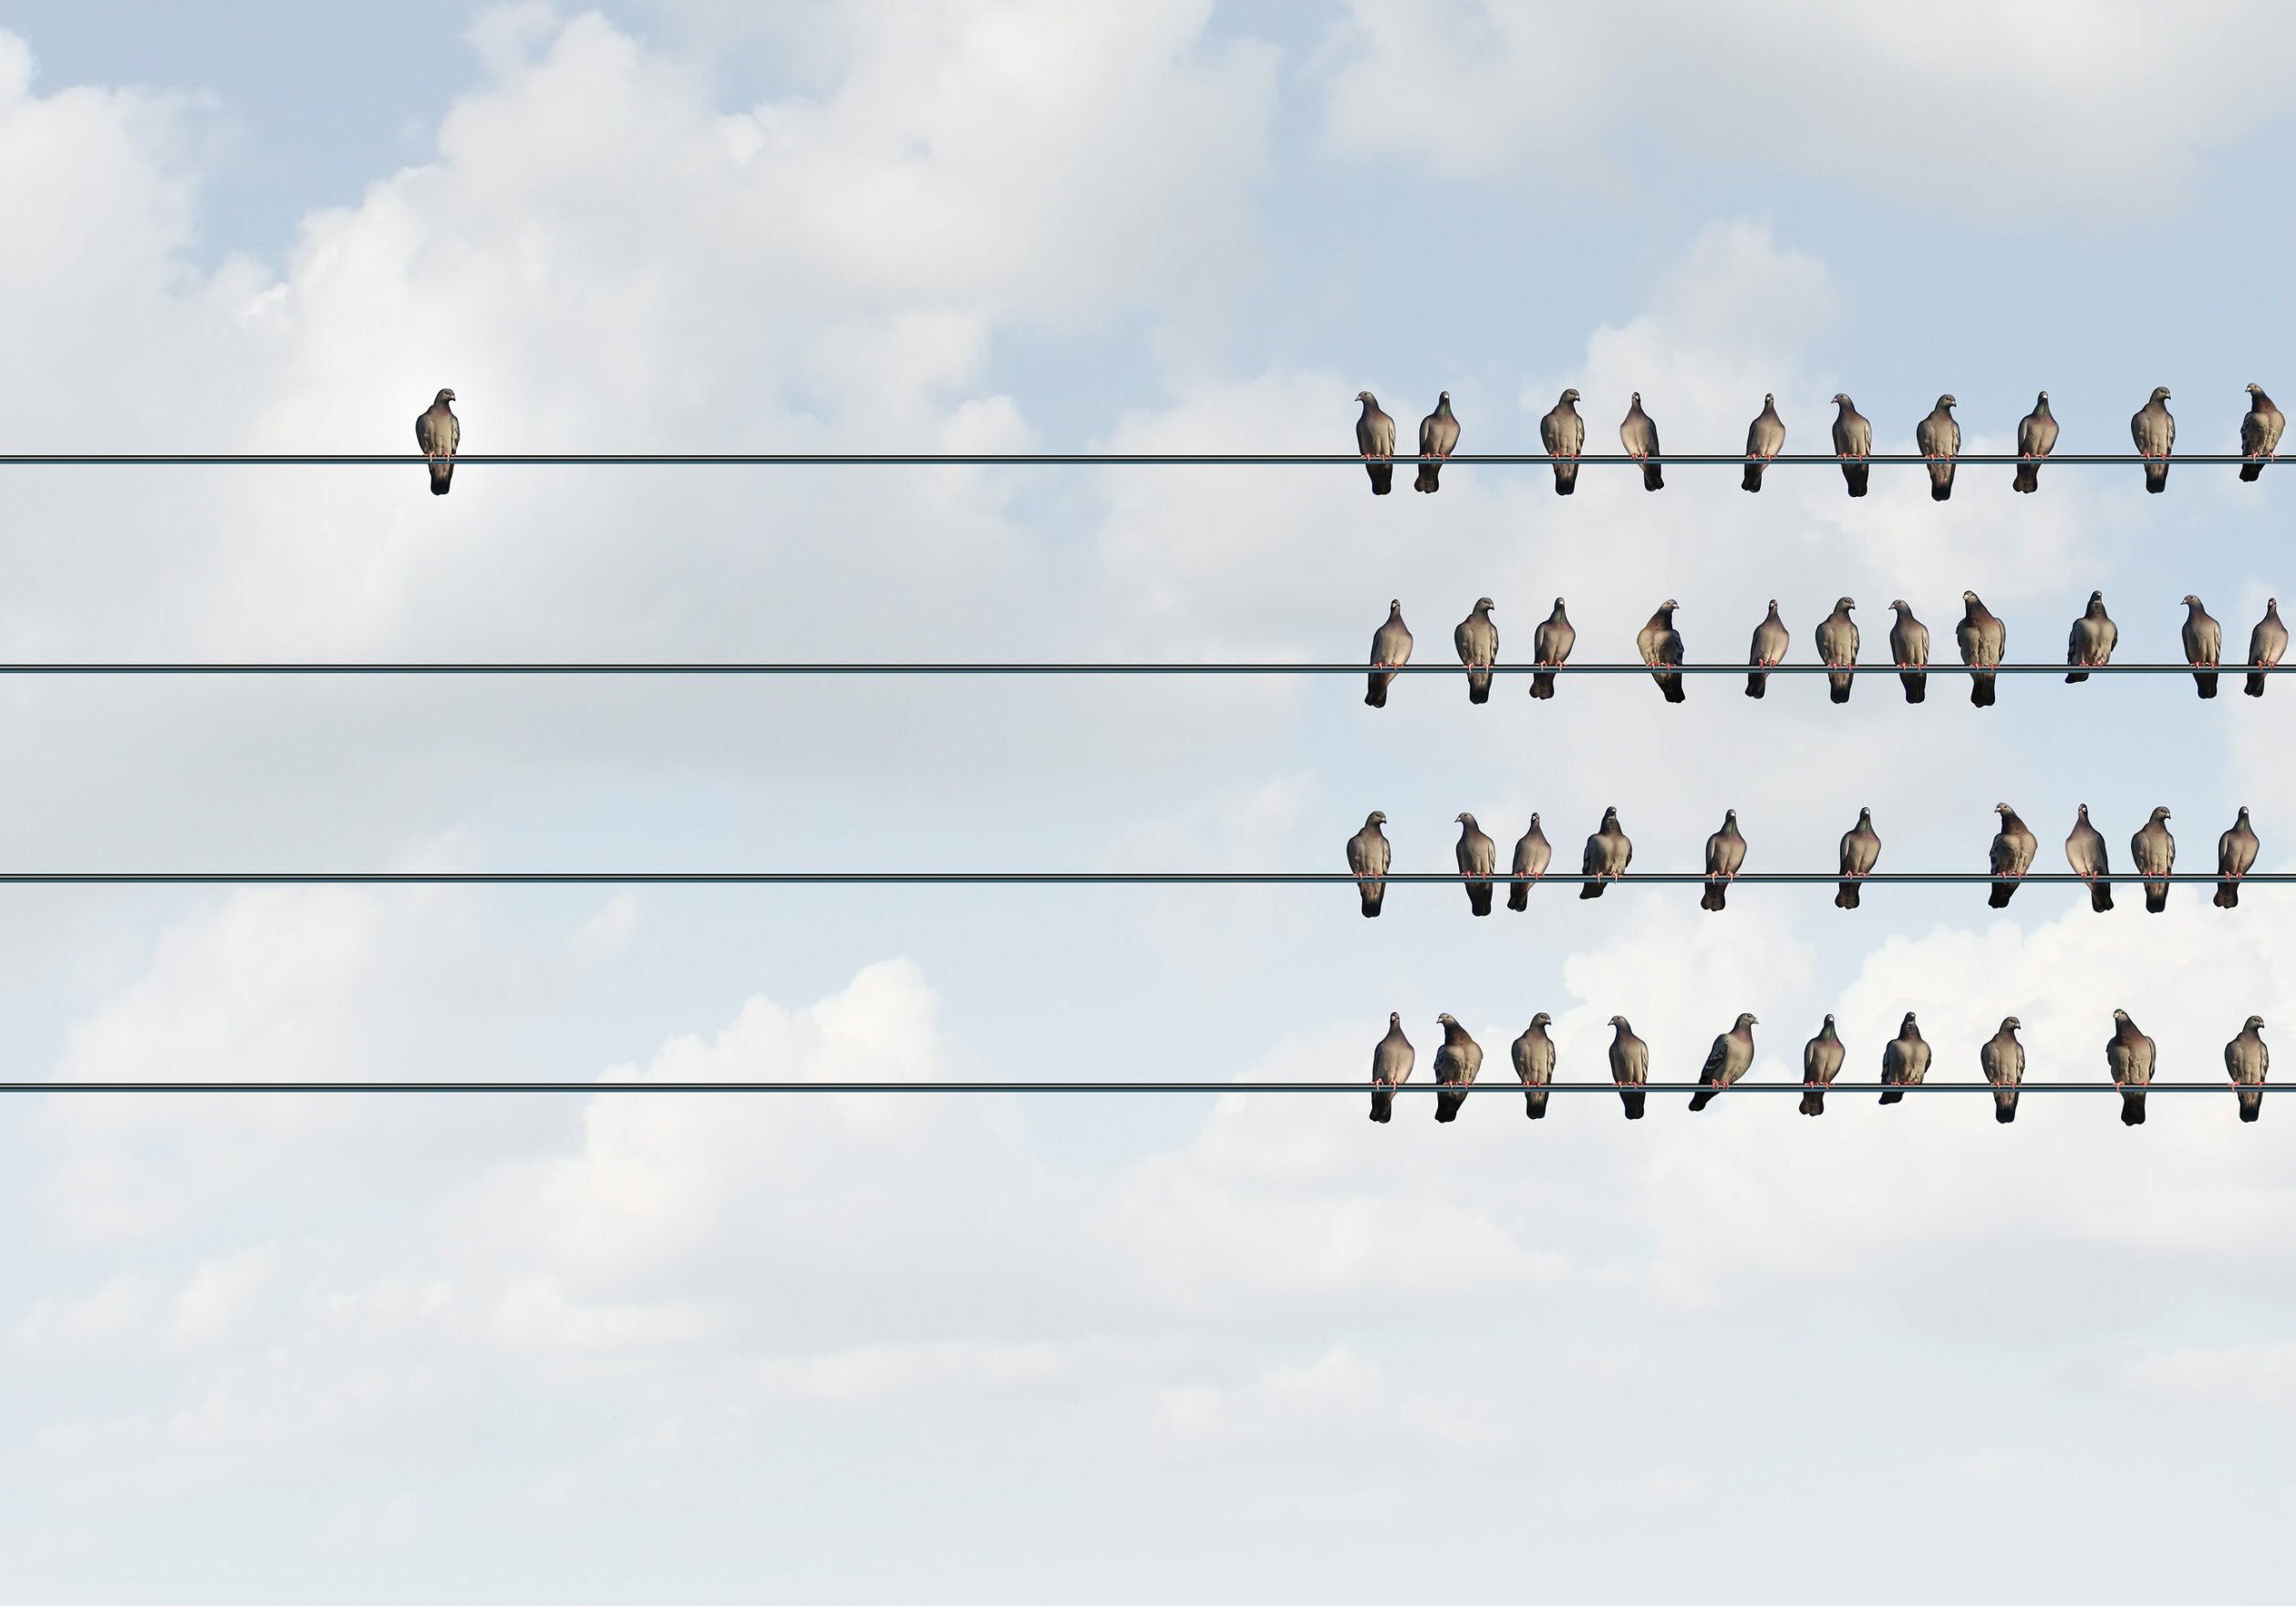 Birds Grouped on Wires with One Bird by Itself "Individuality"